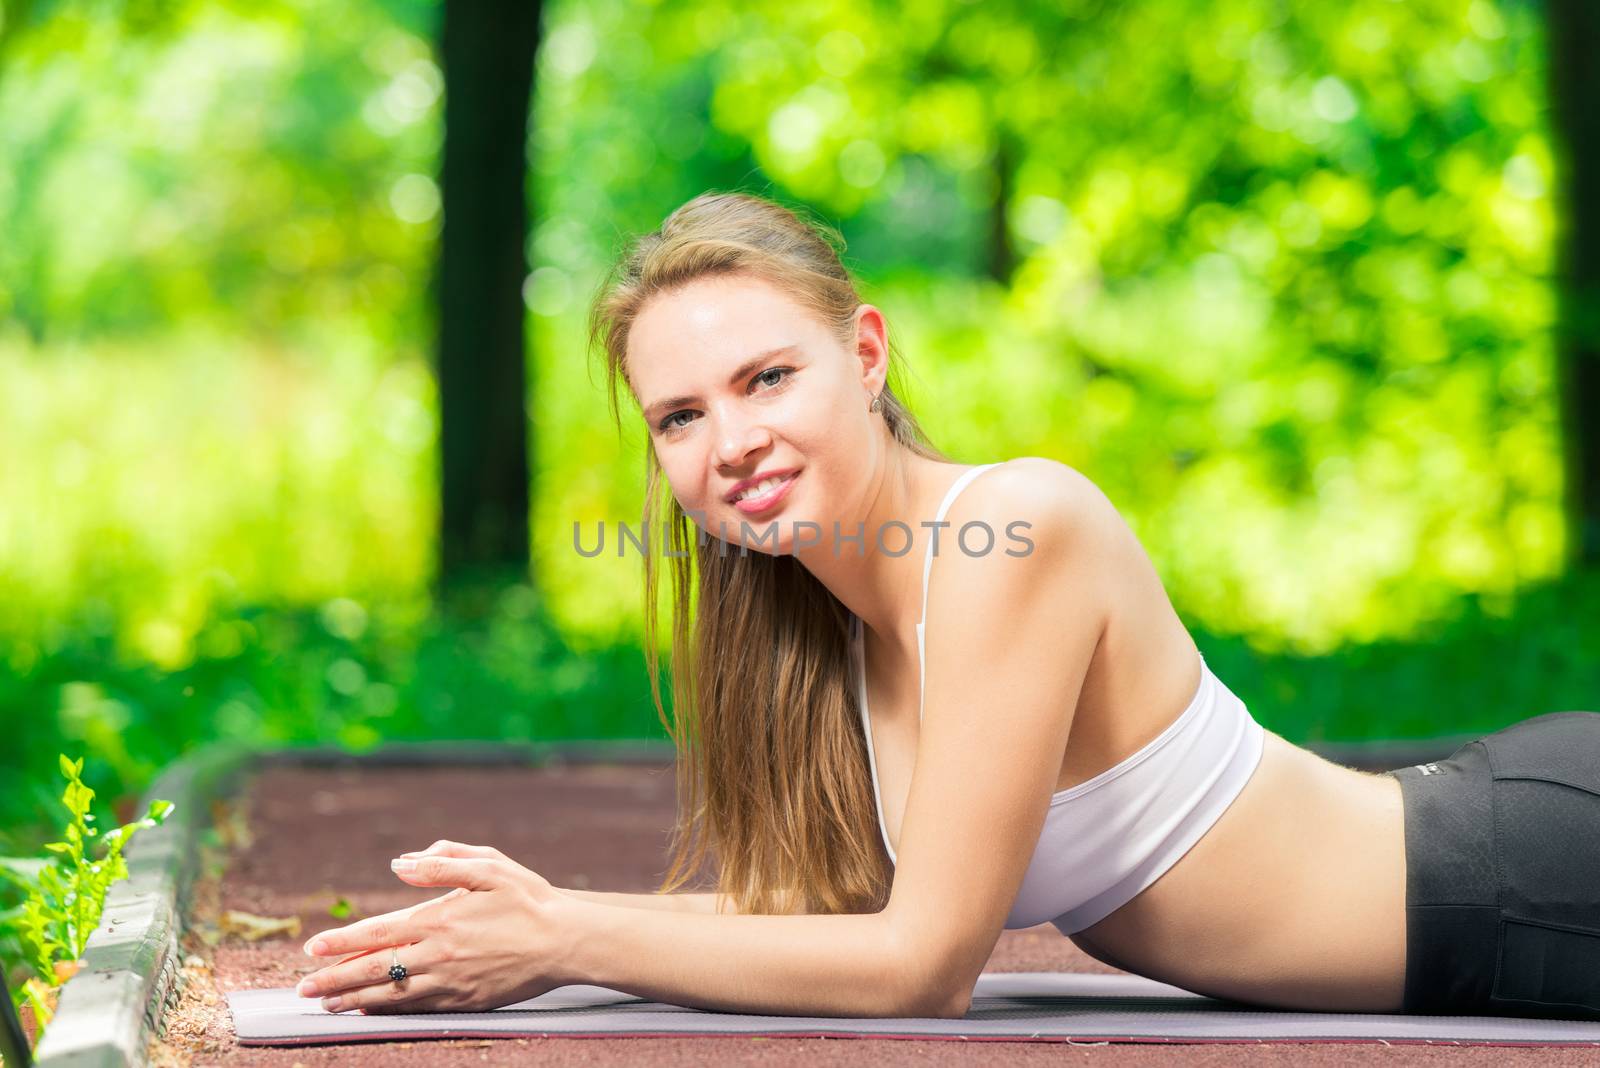 portrait of an active girl outdoor pilates trainer in training